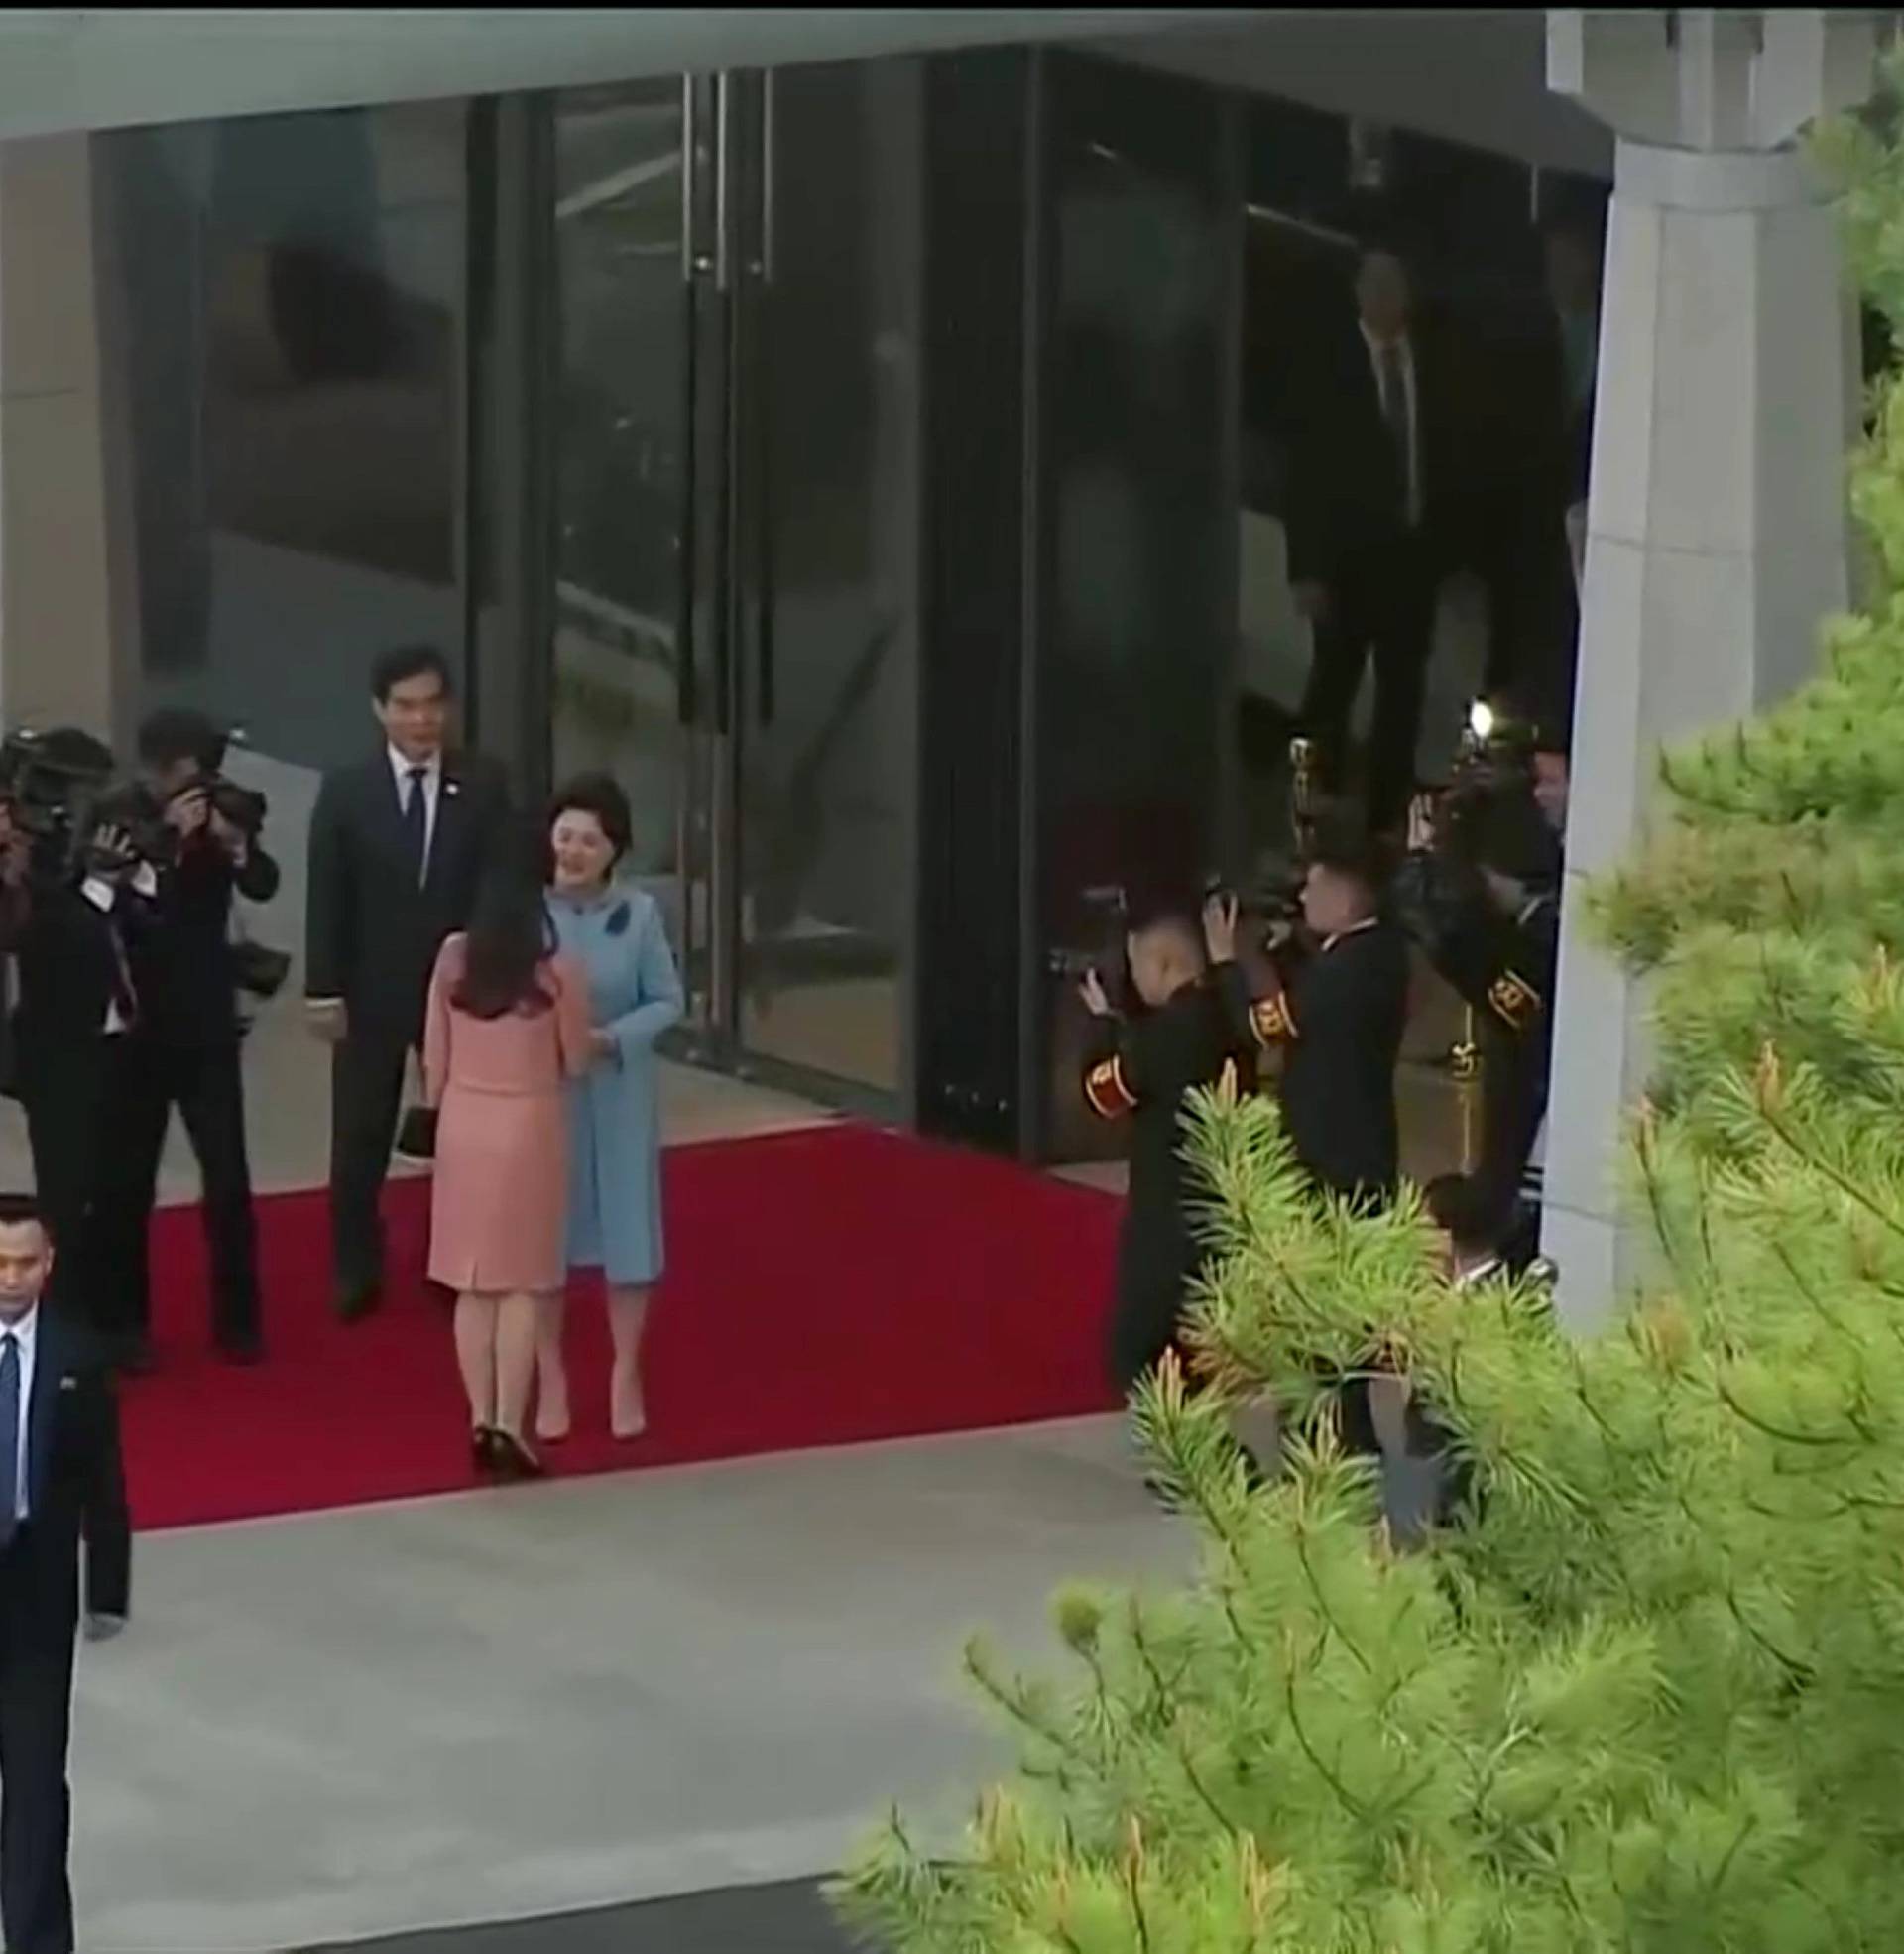 North Korean leader Kim Jong Un's wife Ri Sol Ju arrives to join the inter-Korea dinner at the truce village of Panmunjom